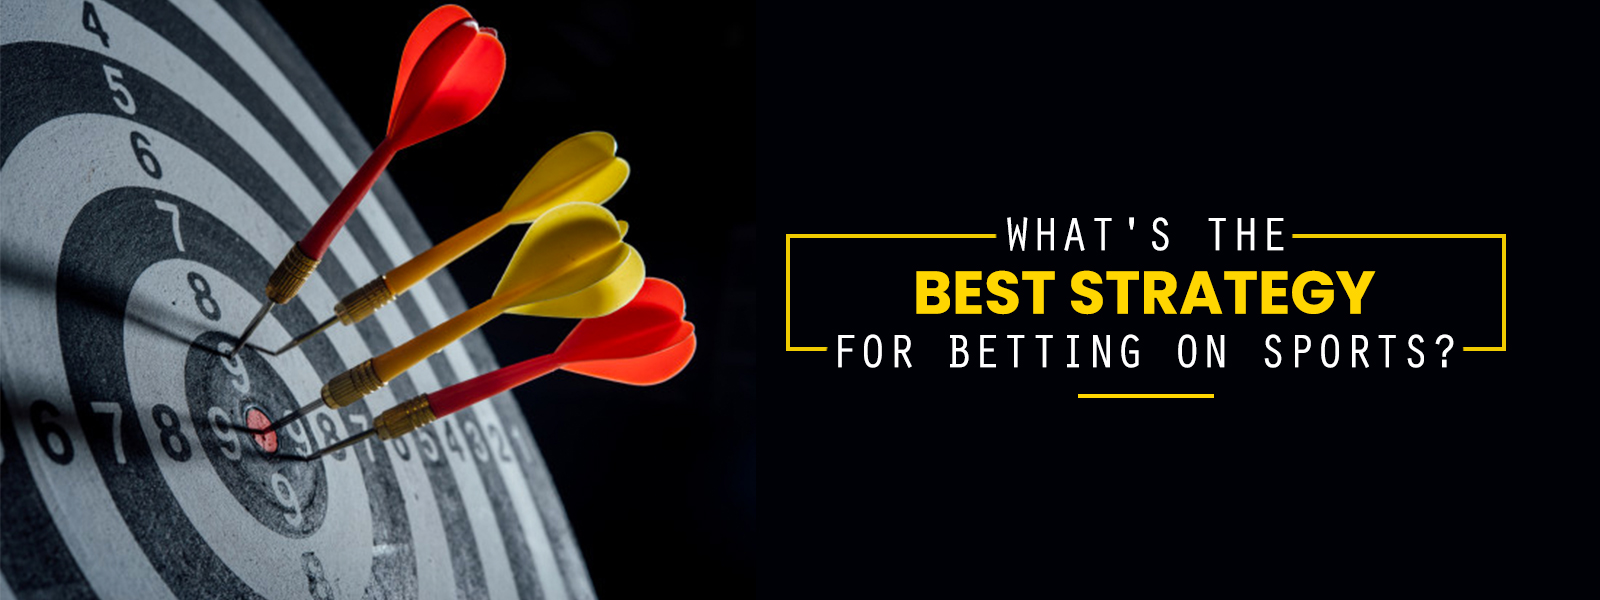 What's The Best Strategy For Betting On Sports?